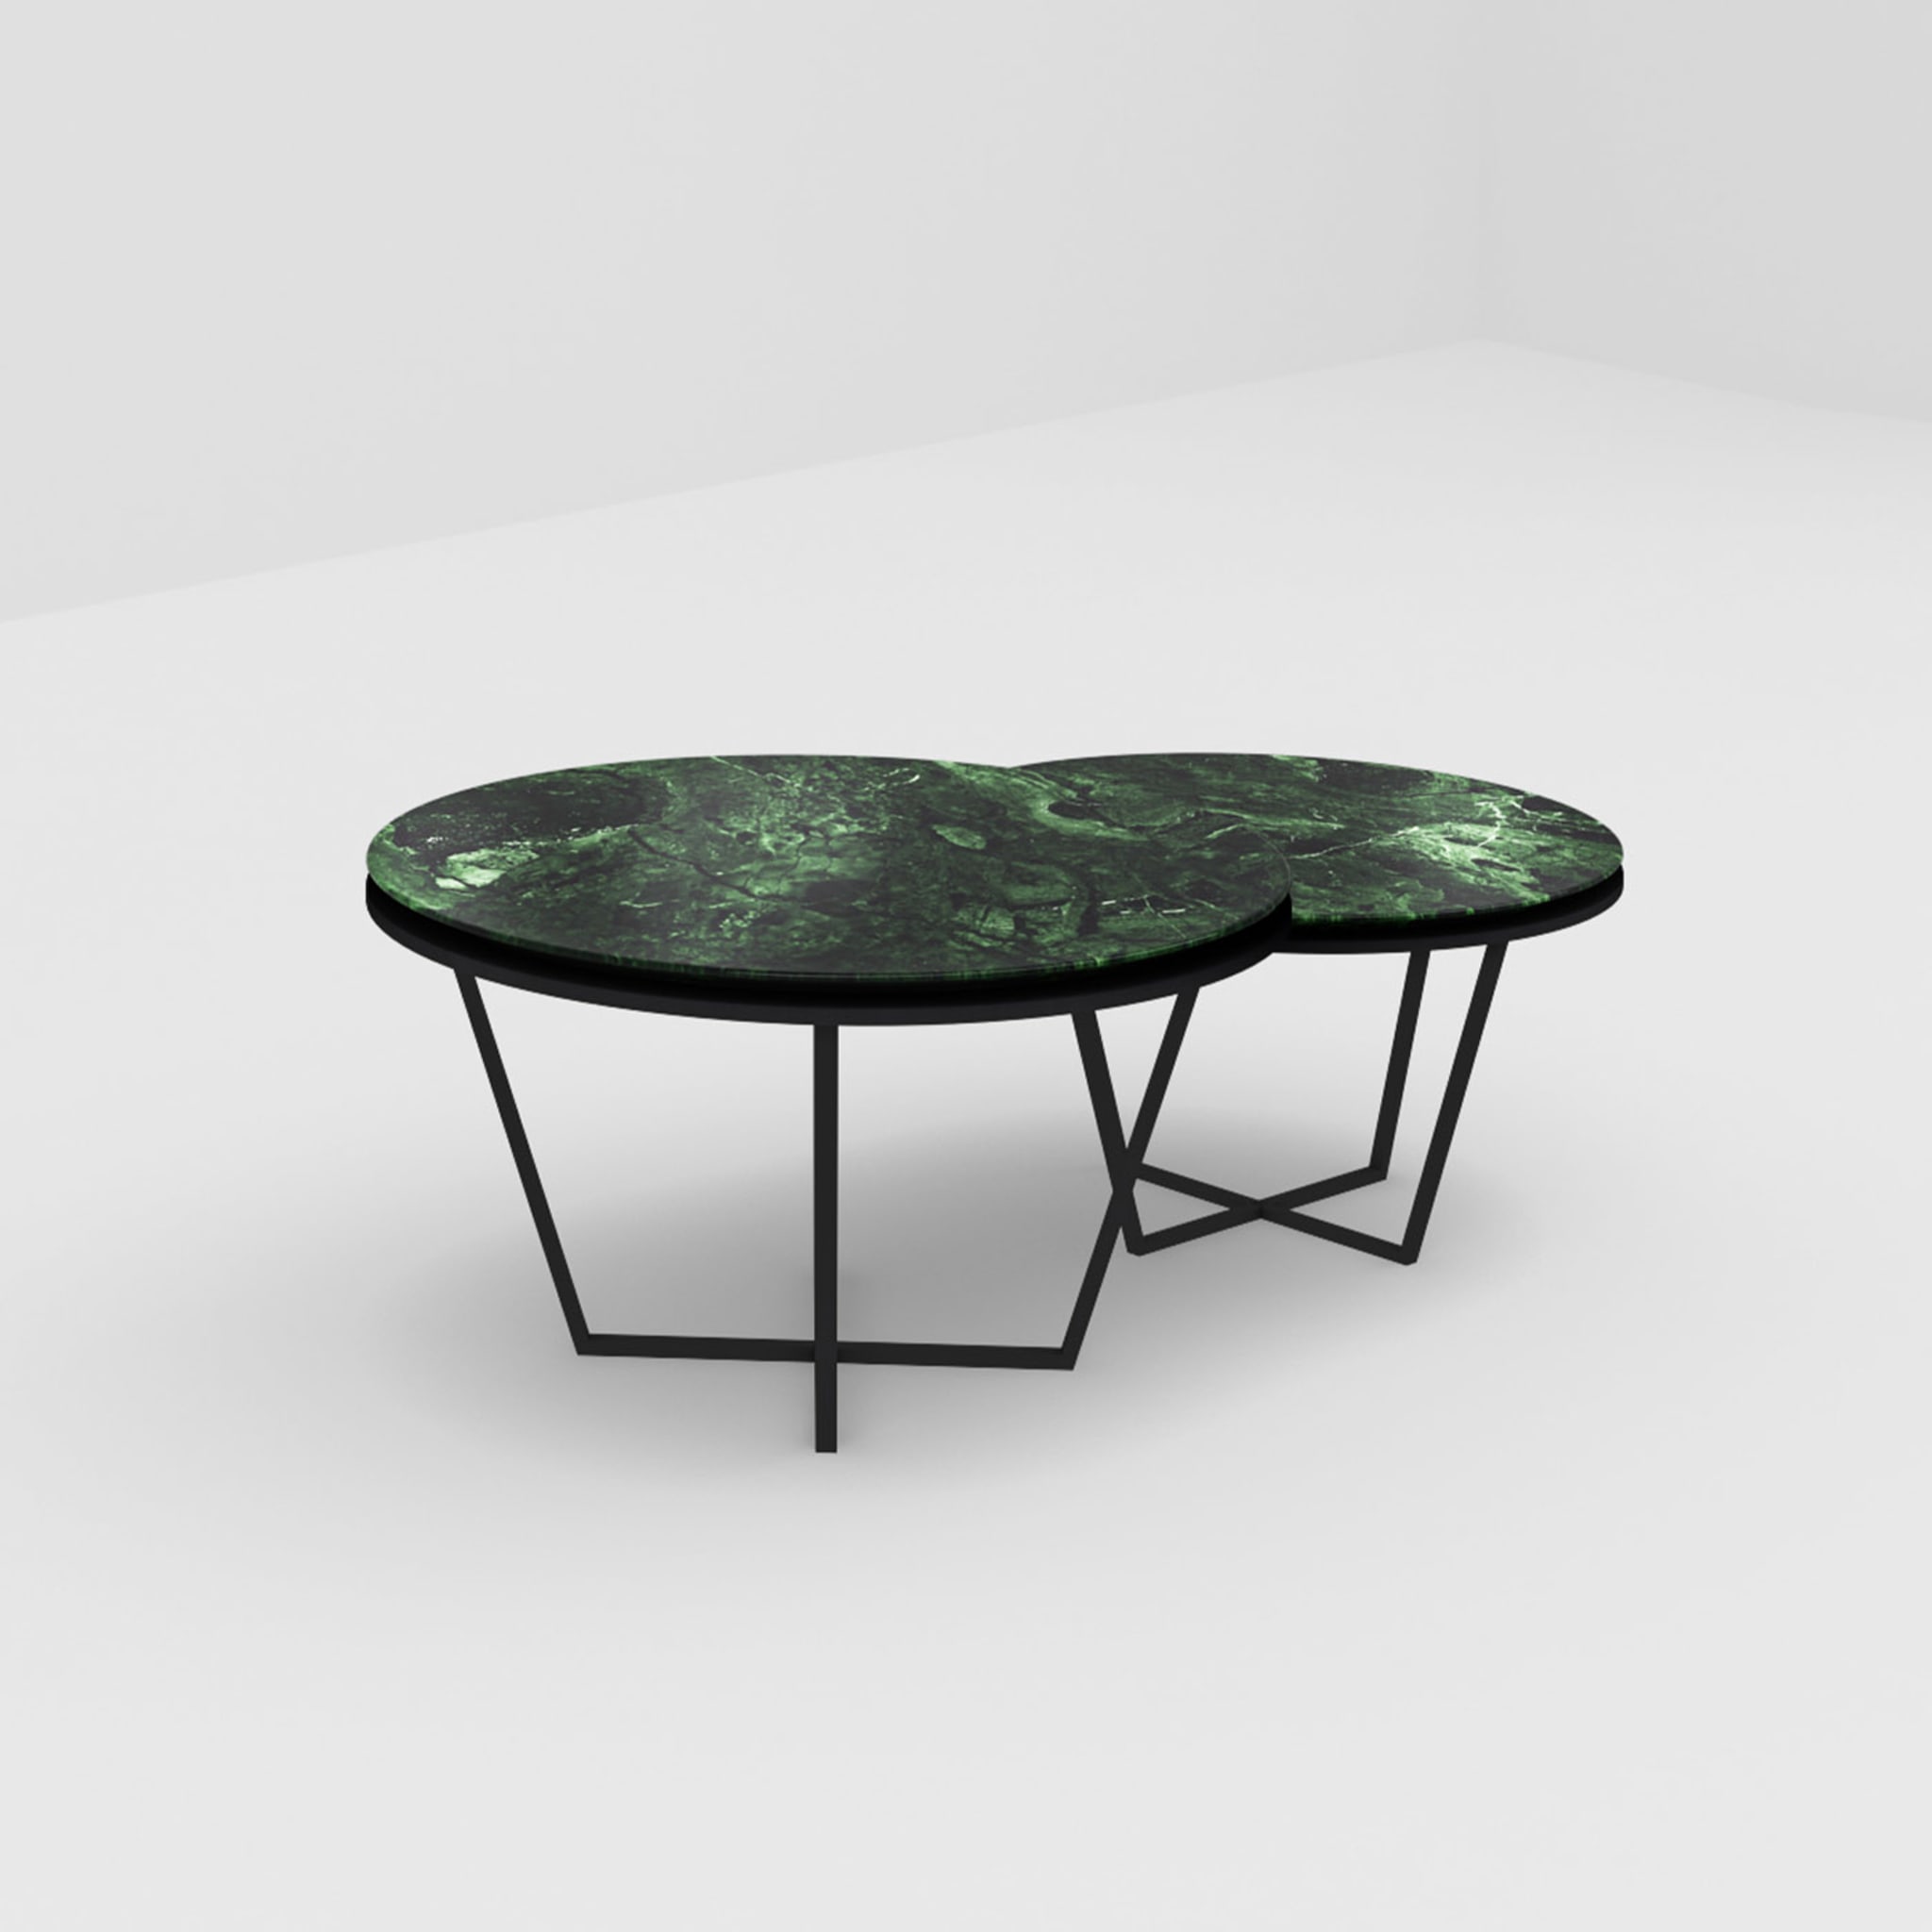 Set of 2 Different-Height Round Verde Alpi Marble Coffee Tables - Alternative view 1